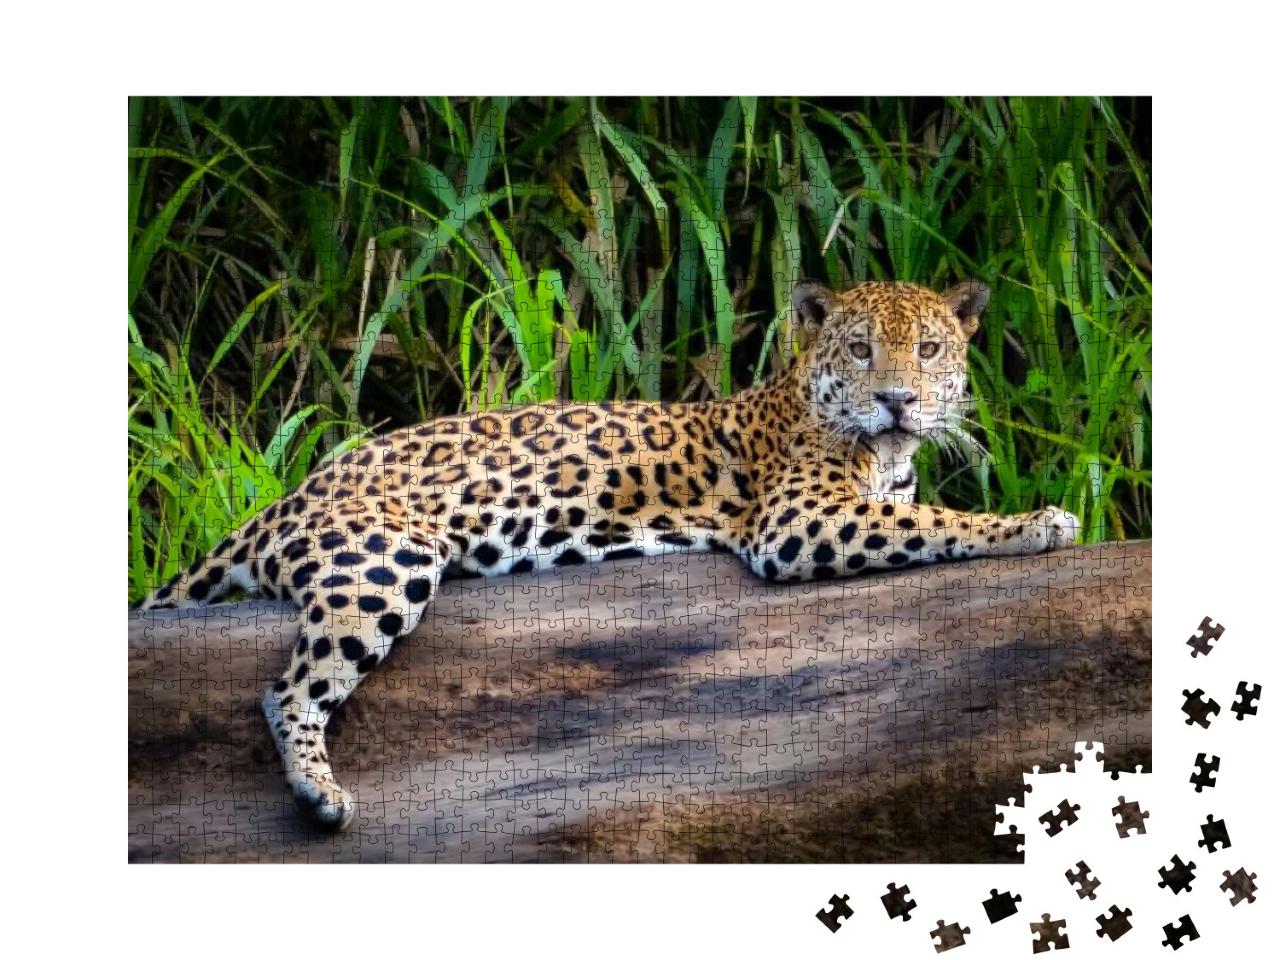 A Jaguar Relaxes on a Tree Trunk on the Banks of the Tamb... Jigsaw Puzzle with 1000 pieces